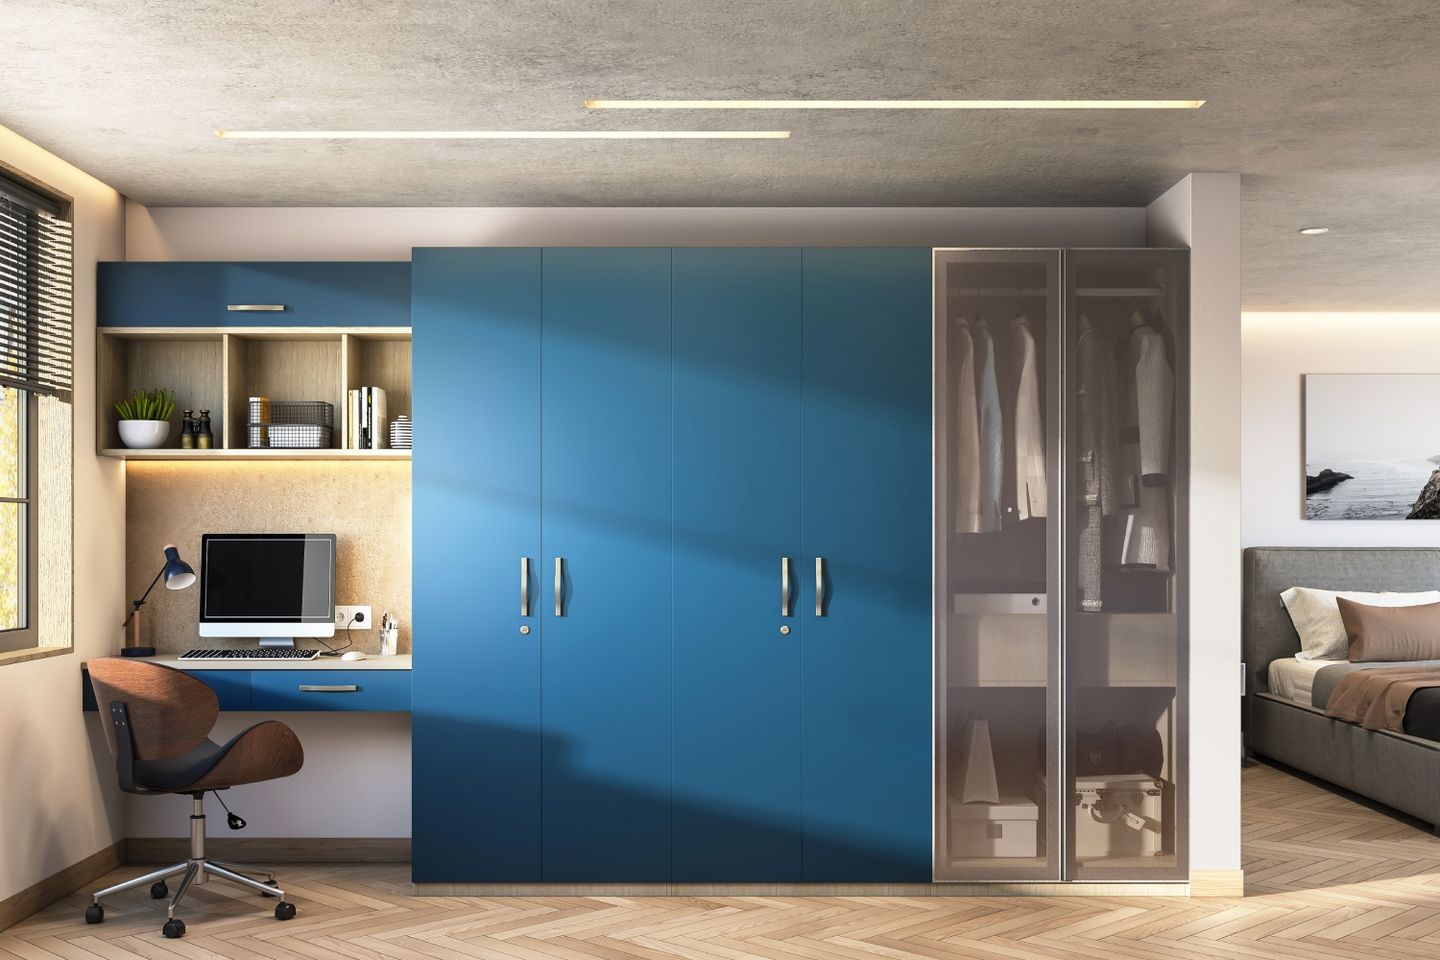 6-Door Blue Swing Wardrobe Design With Glass Shutters And Integrated Blue And Wood Study Unit - Livspace